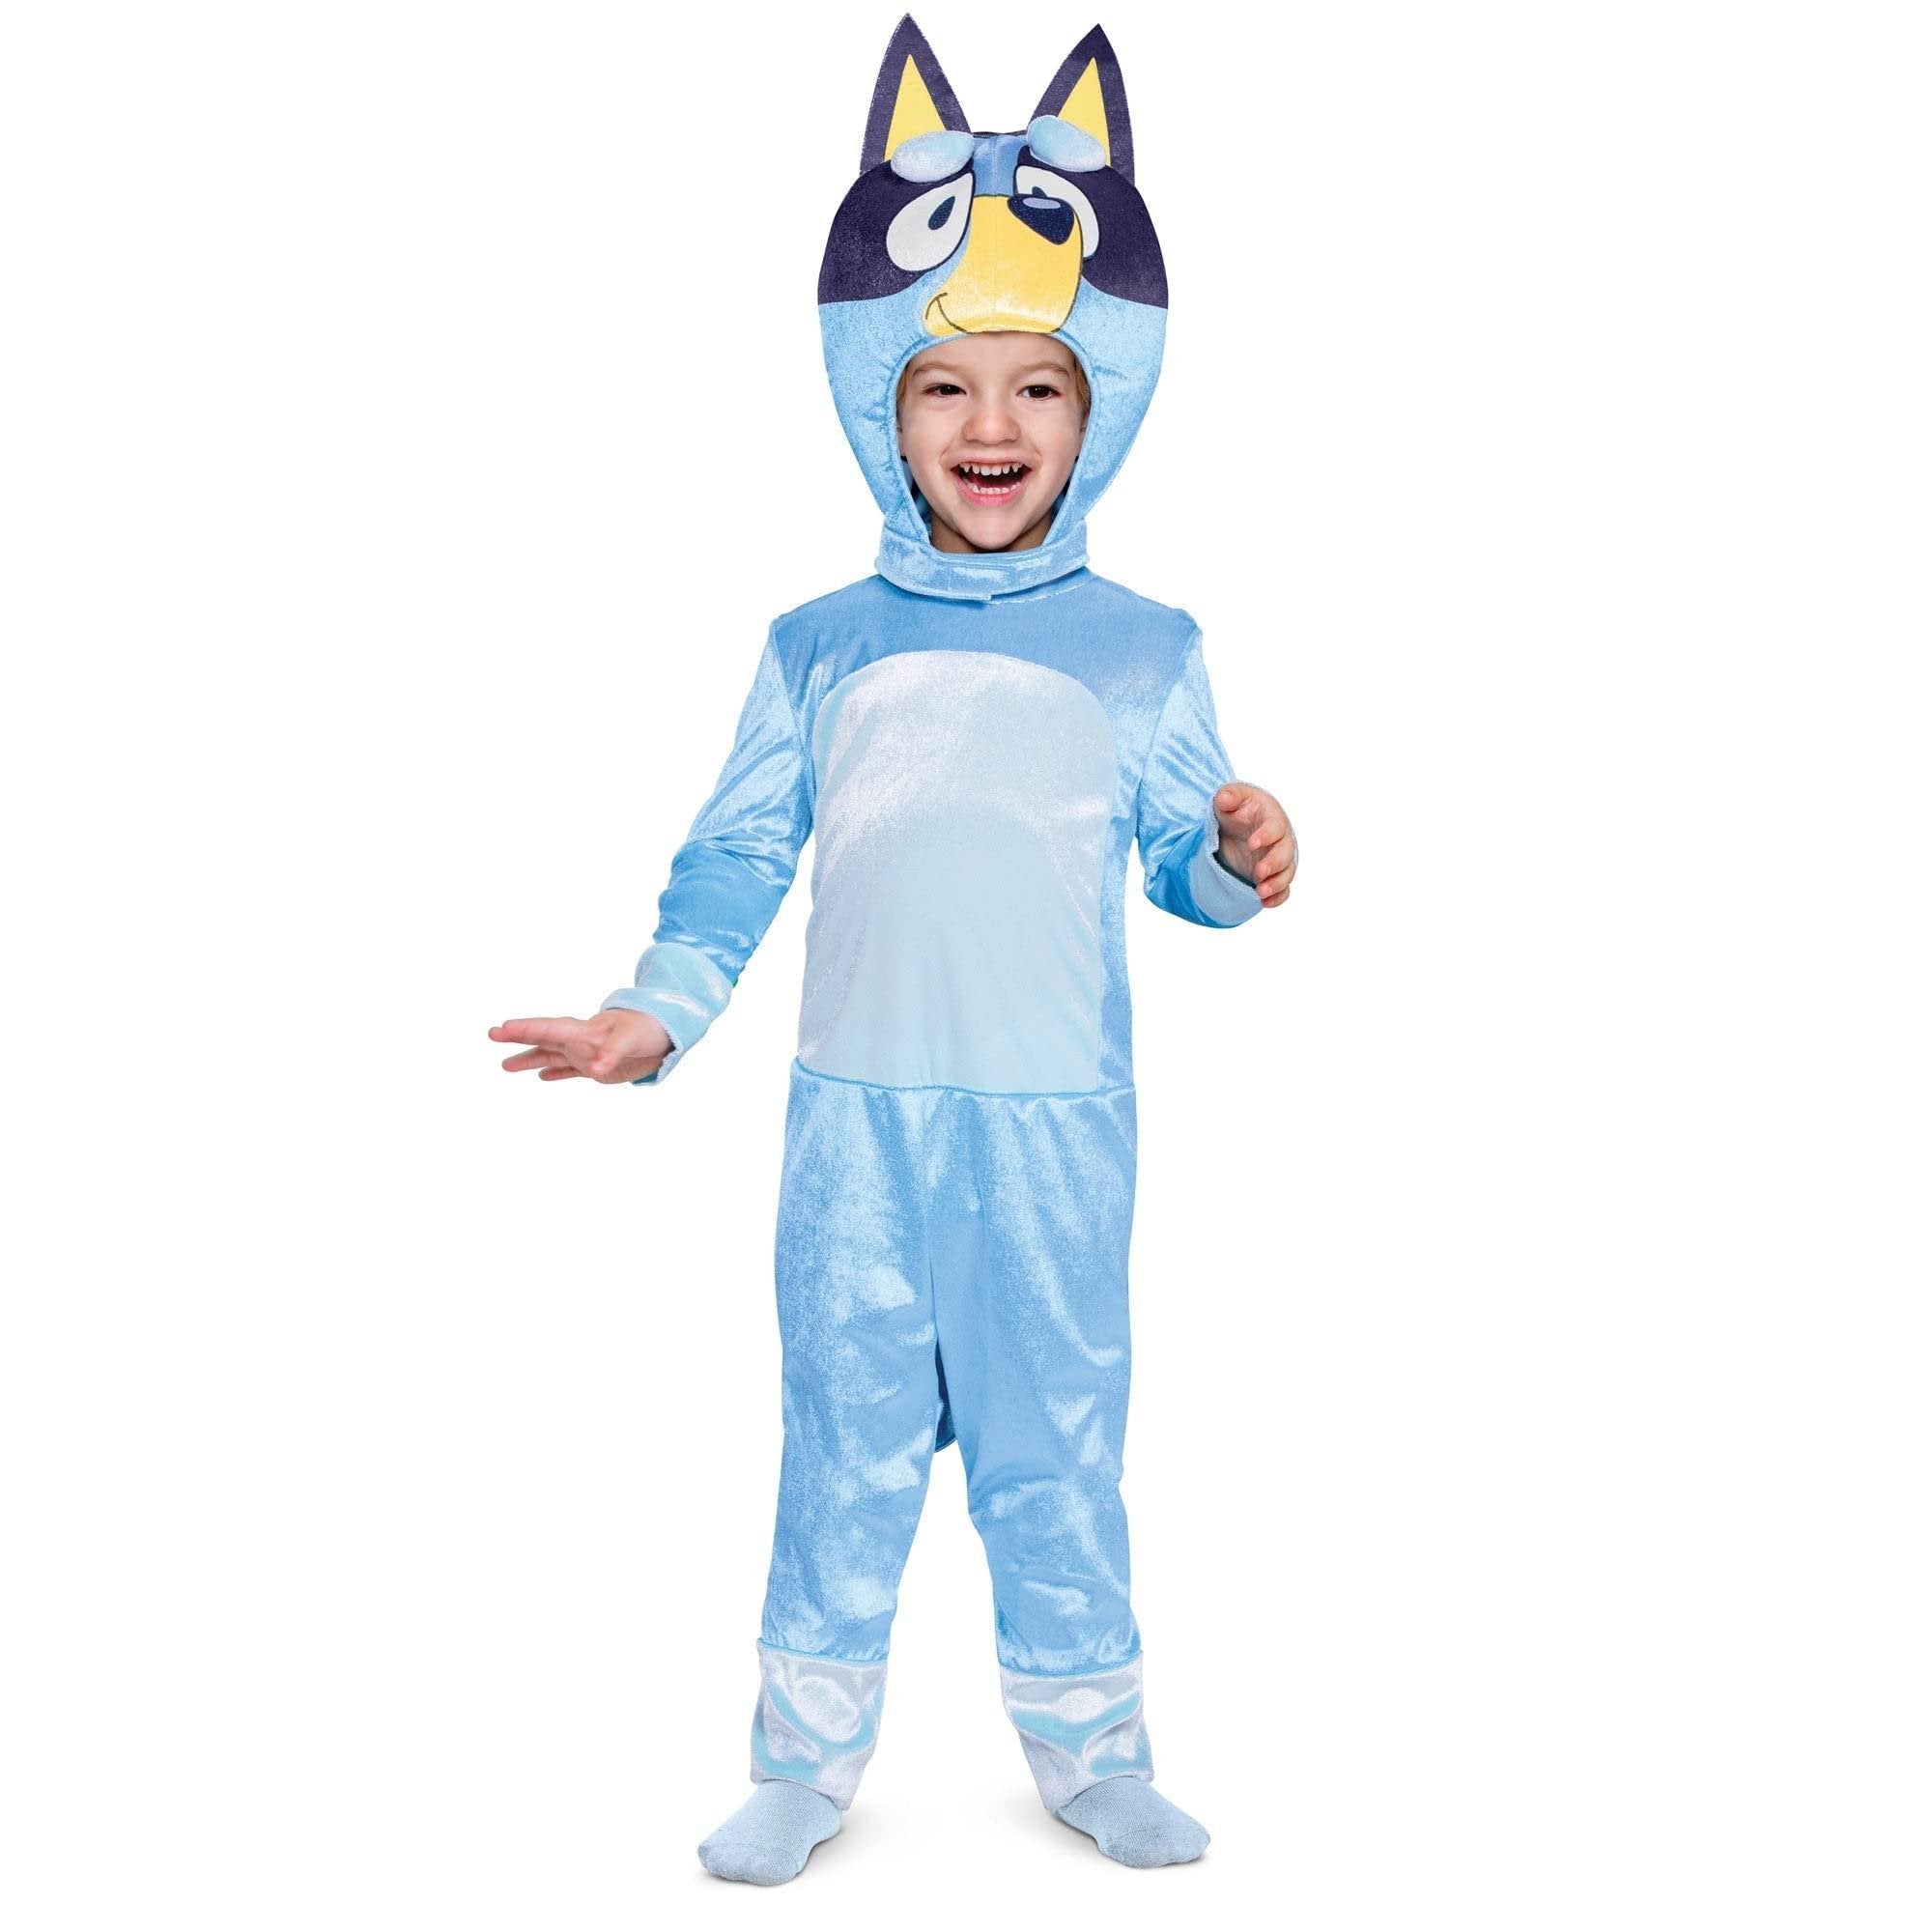 Disguise Bluey Costume for Kids, Official Bluey Character Outfit with Jumpsuit and Mask, Classic Toddler Size Small (2T)